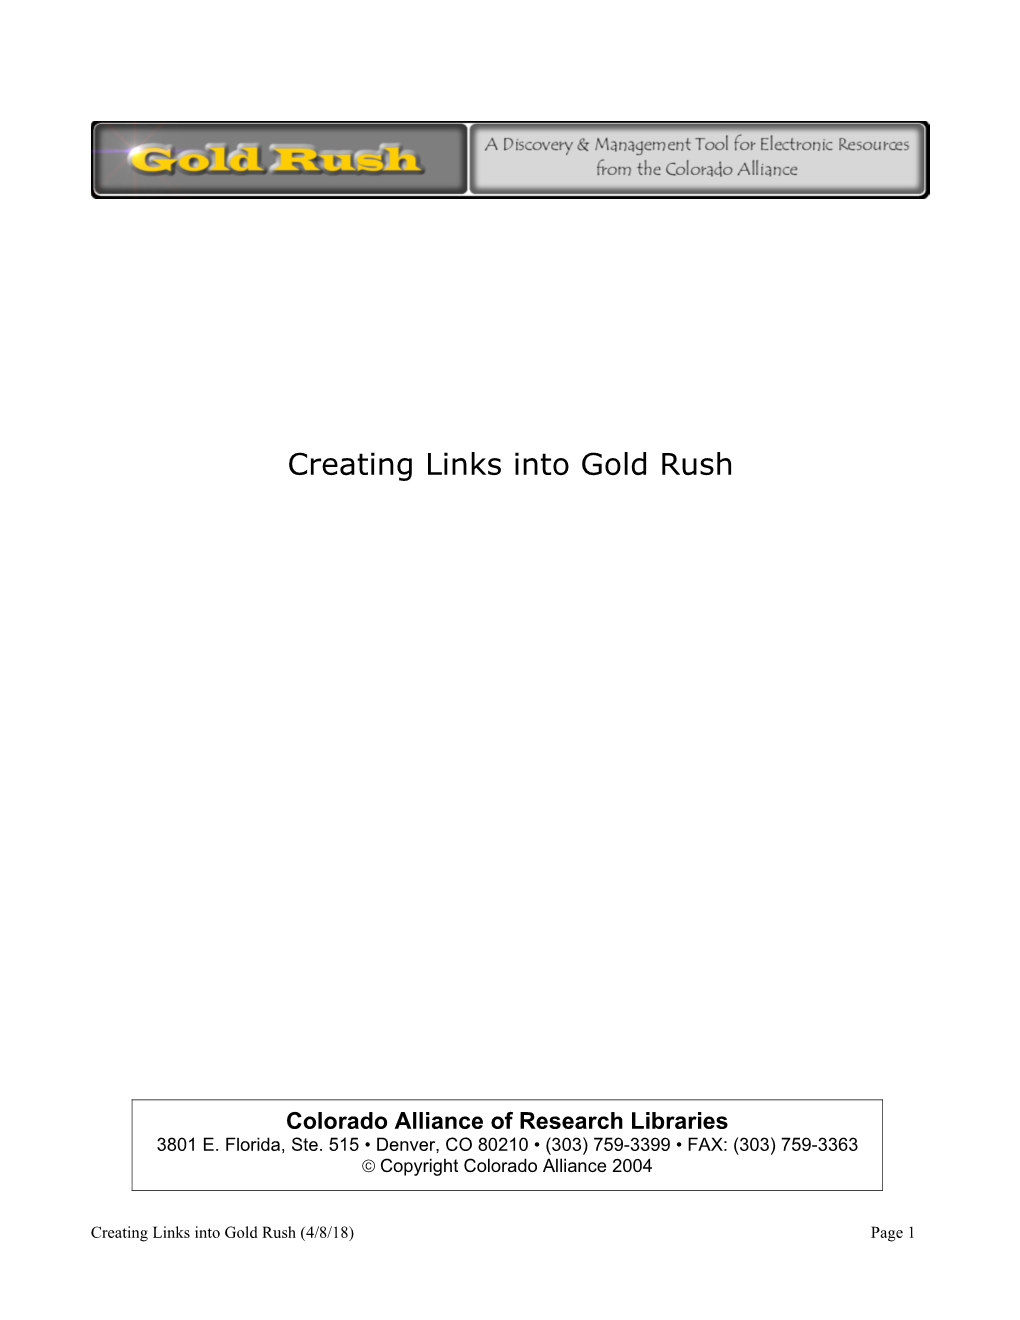 Creating Links Into Gold Rush